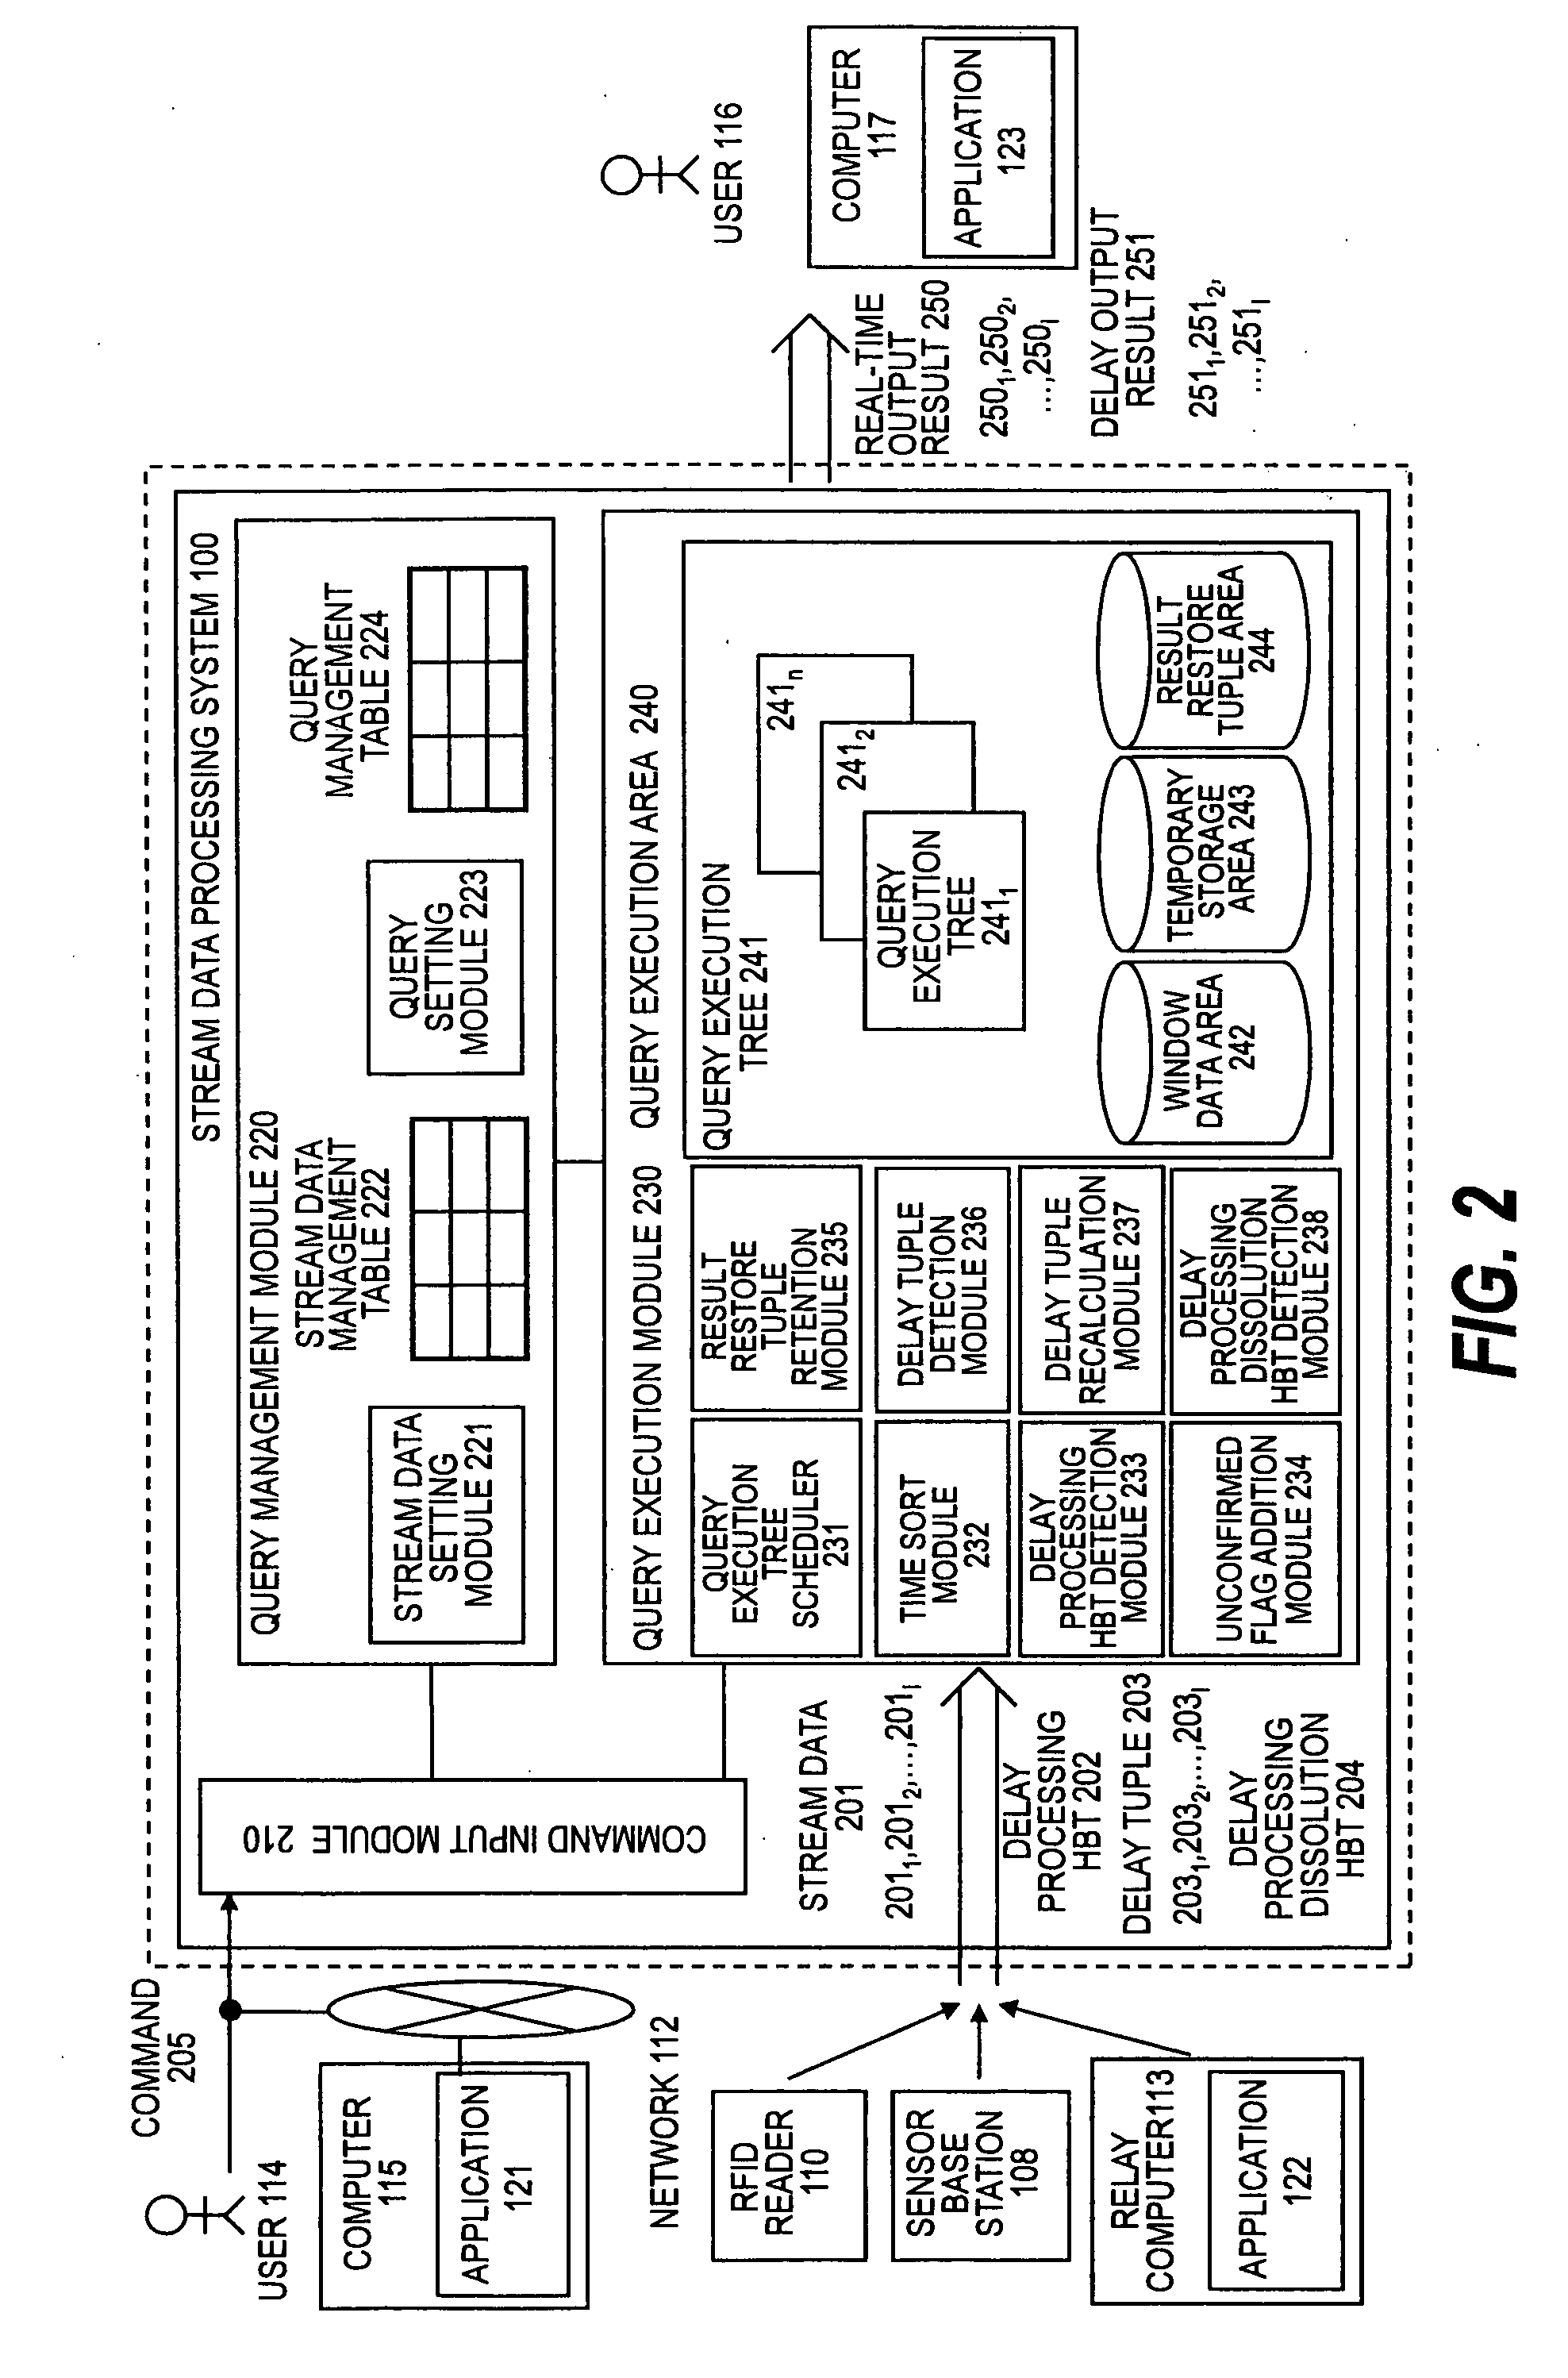 Stream data processing method and computer systems